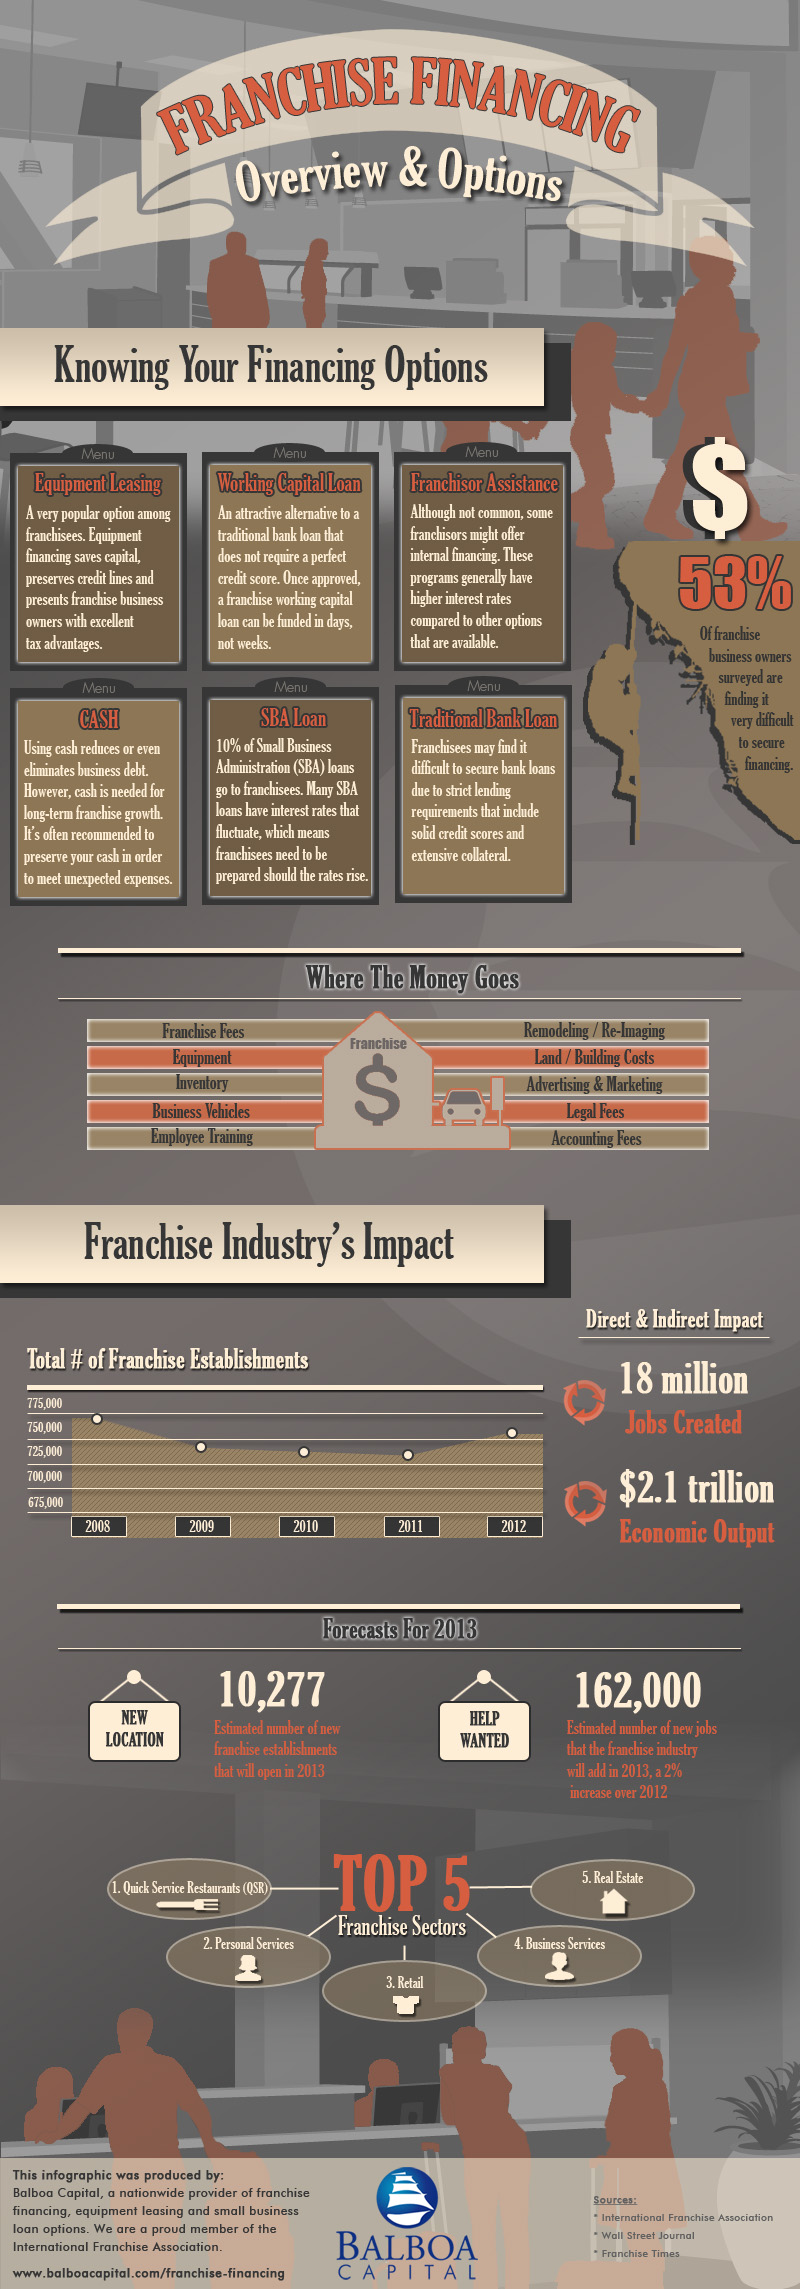 Franchise Financing Infographic from Balboa Capital